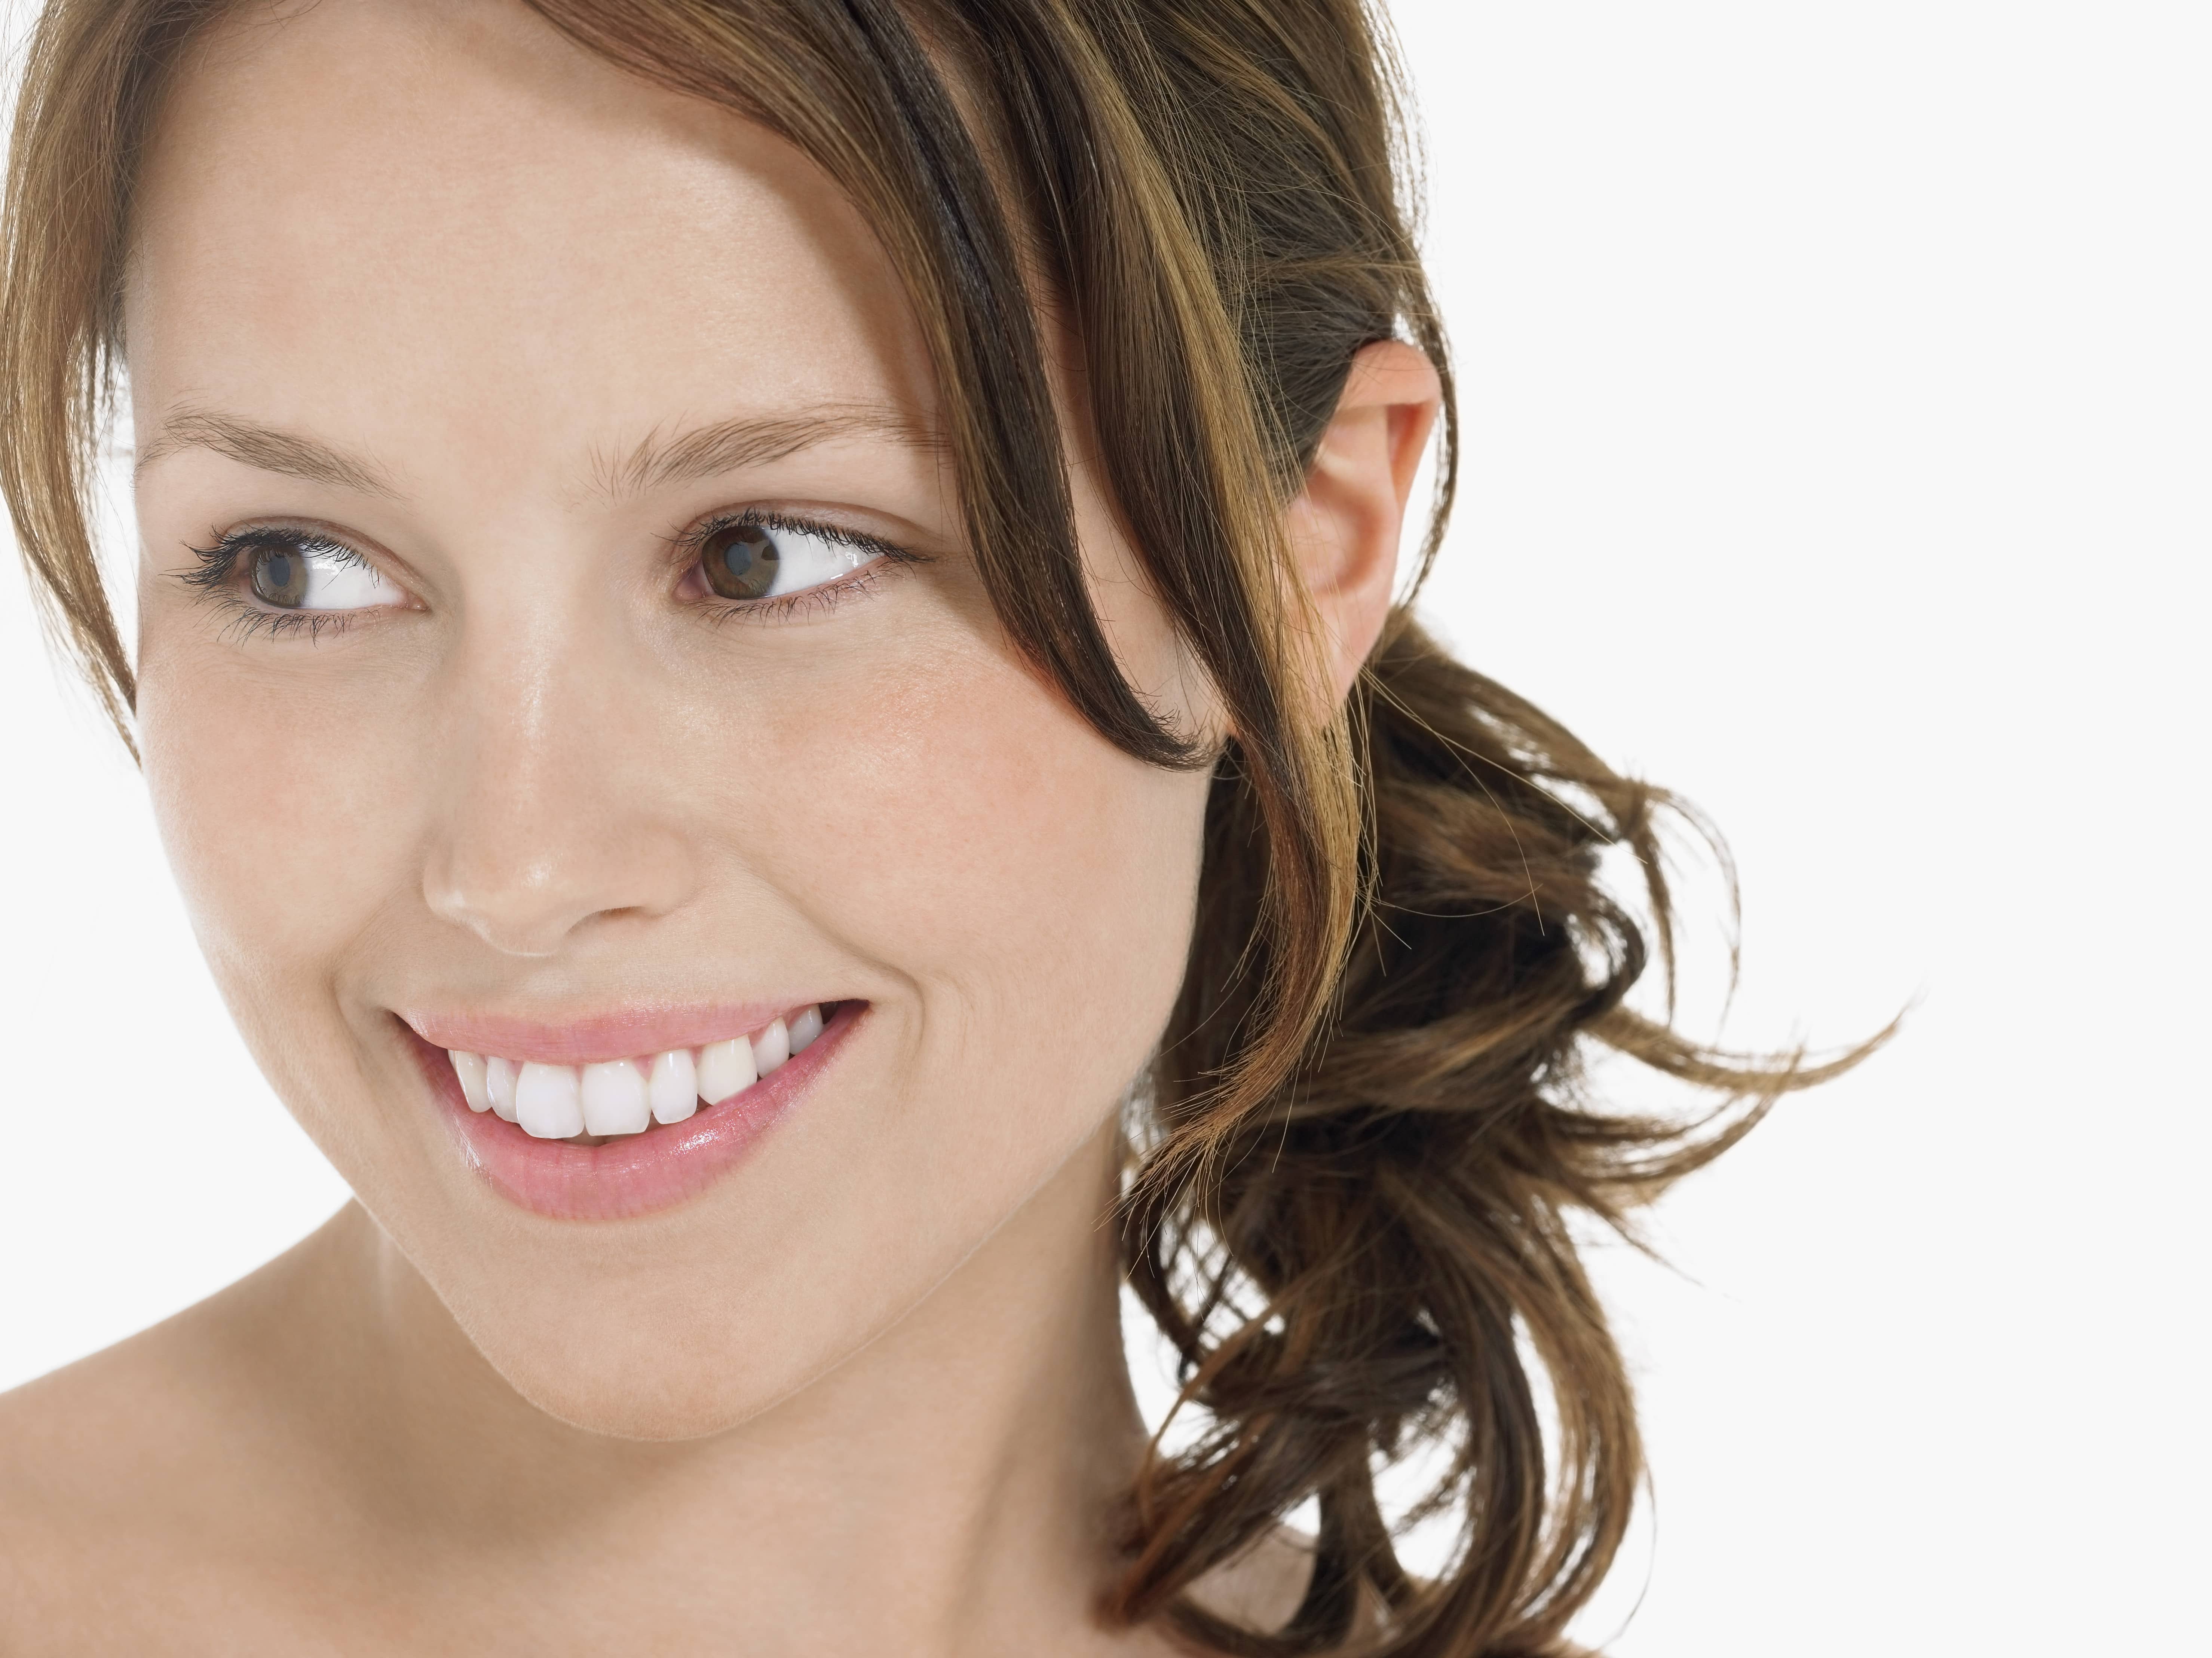 Reasons for Teeth Discoloration and Benefits of Teeth Whitening